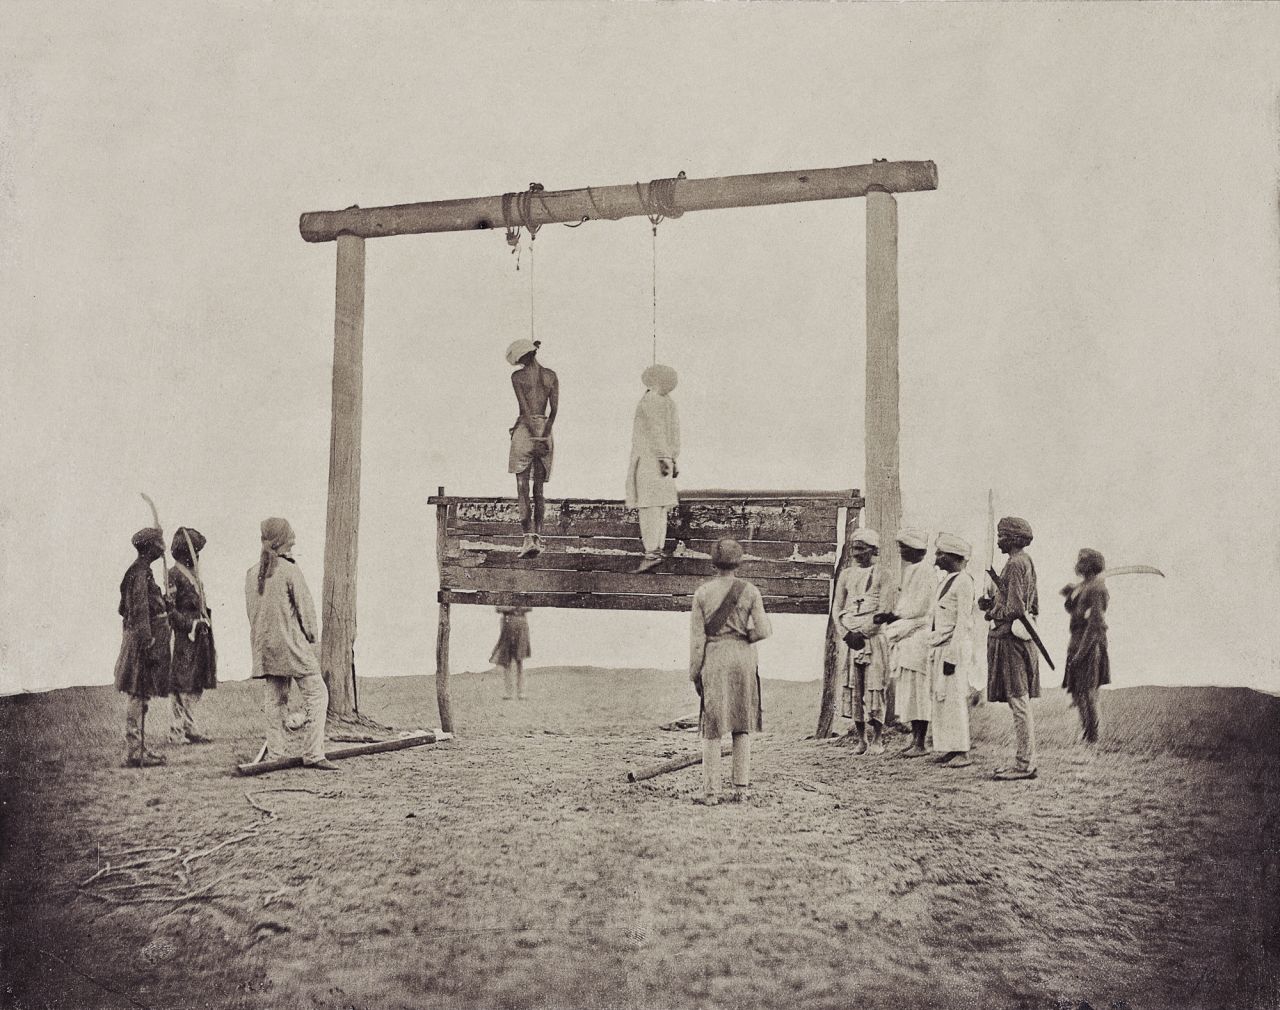 Ethnographic photos reinforced racist stereotypes and some of images in the pair's book reflect many of the ideologies underpinning the British colonial mission. Italian-British photographer Felice Beato, one of the best-known traveling photographers of the 19th century, captures the execution of mutineers in 1858.